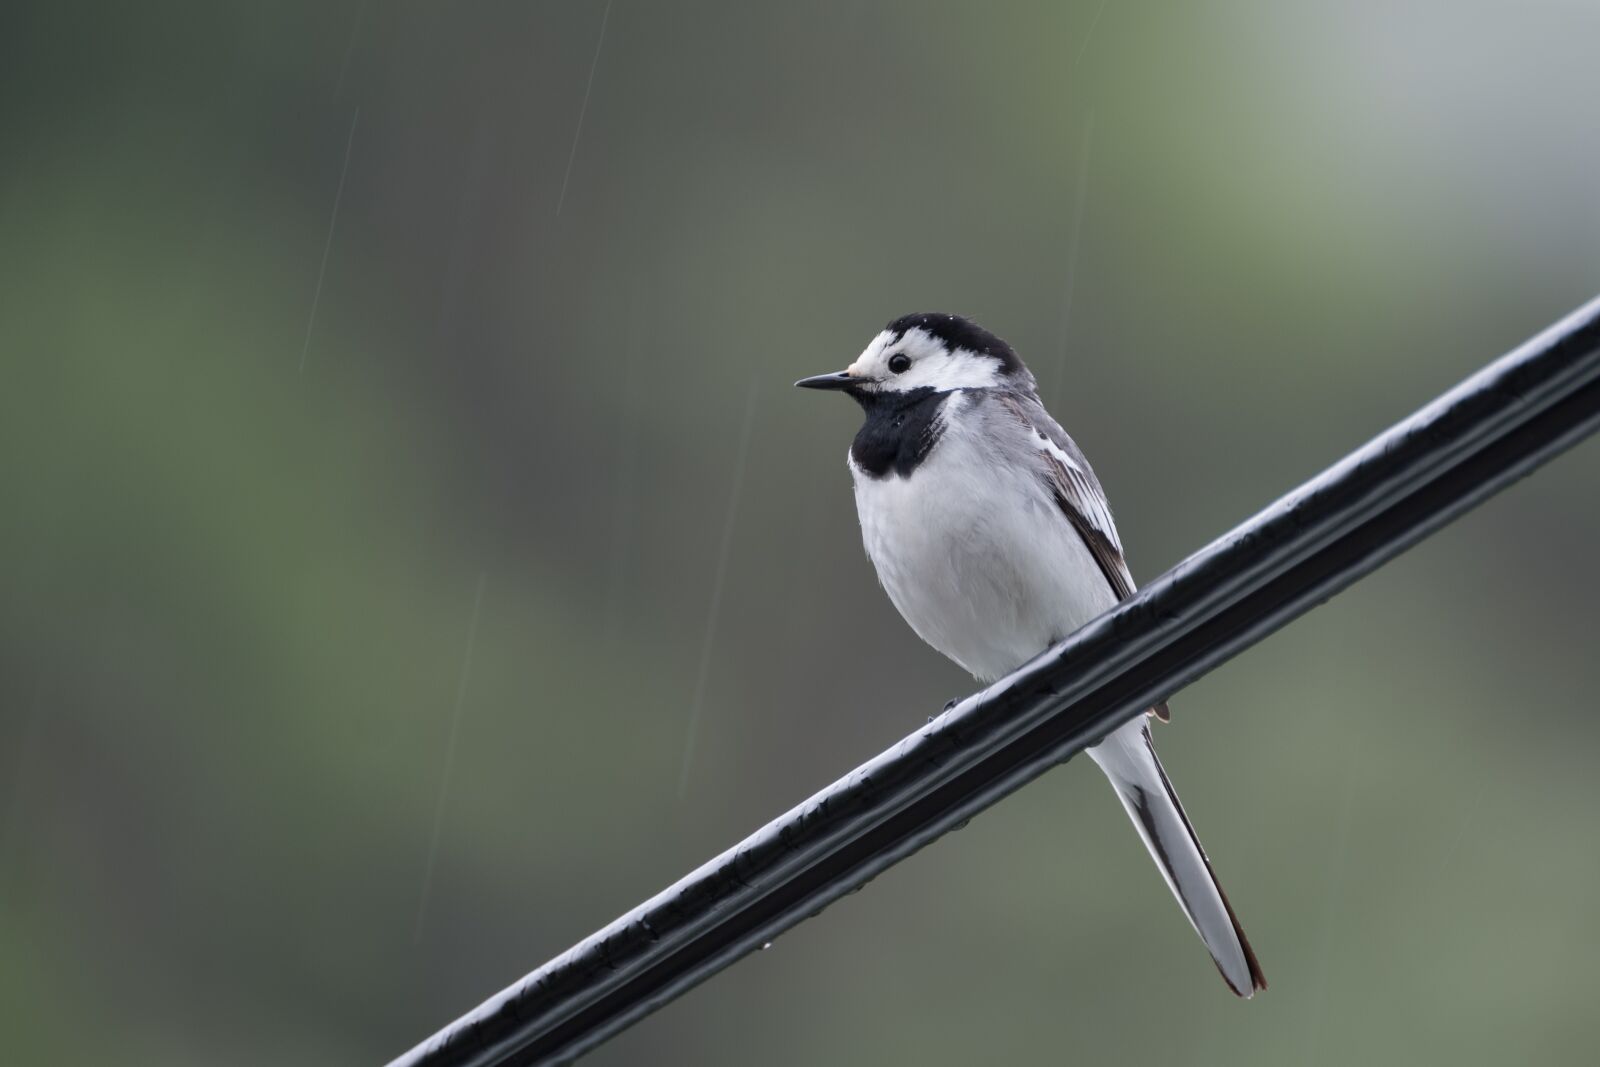 Fujifilm X-T2 + XF100-400mmF4.5-5.6 R LM OIS WR + 1.4x sample photo. White wagtail, rain, cable photography